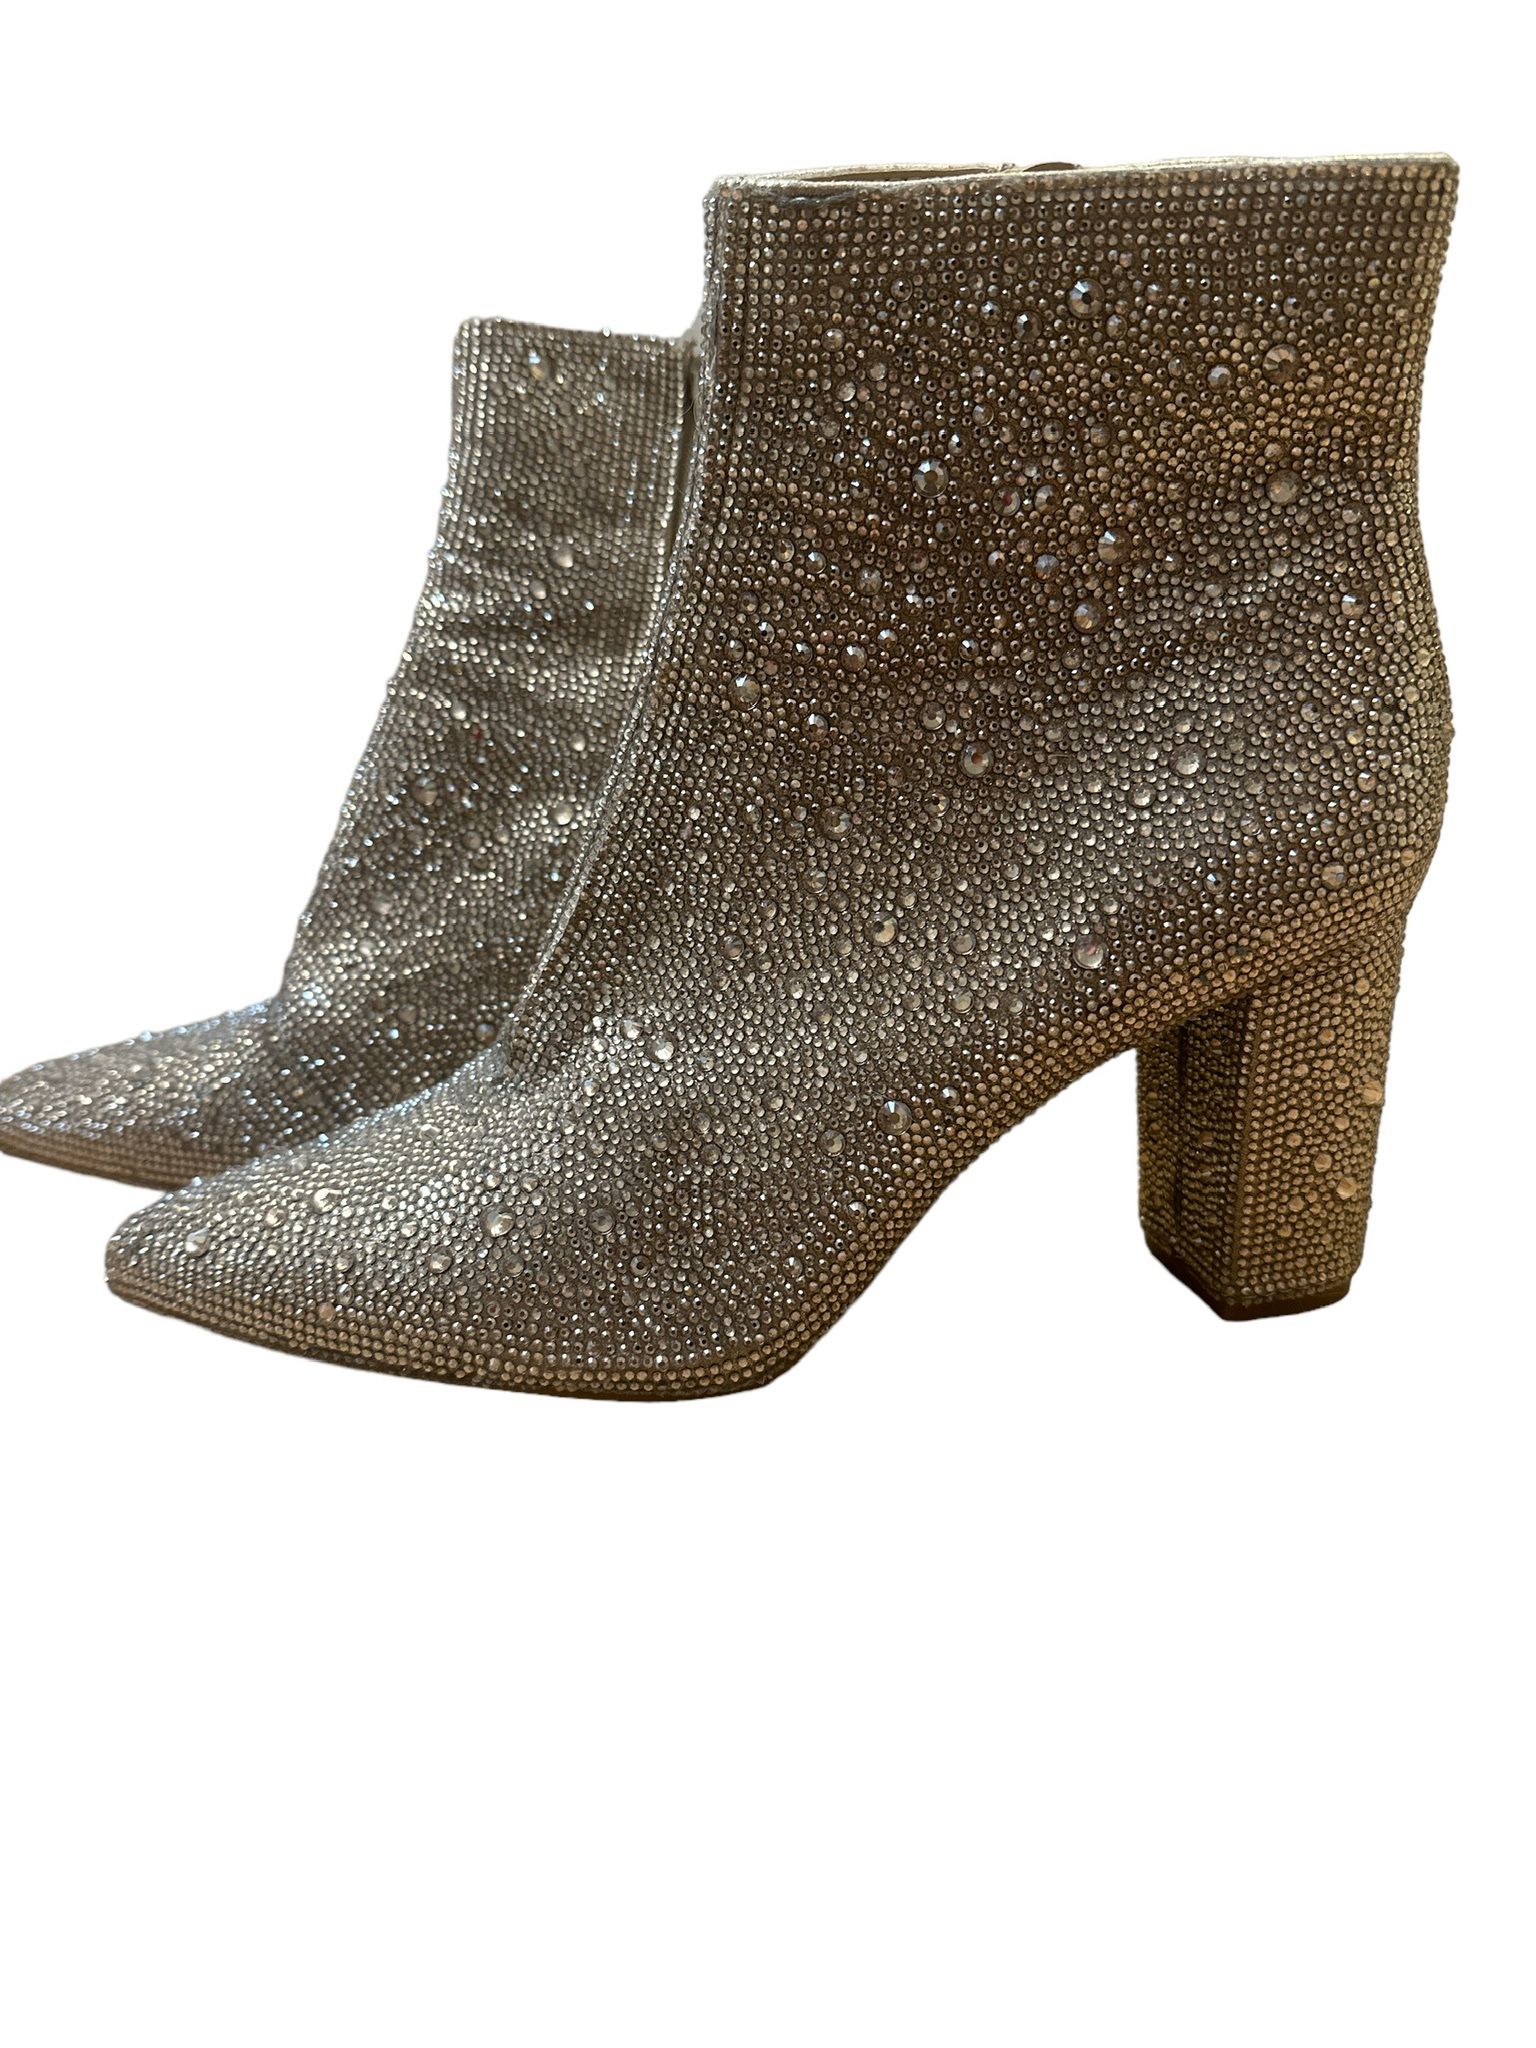 Gold Betsy Johnson Booties